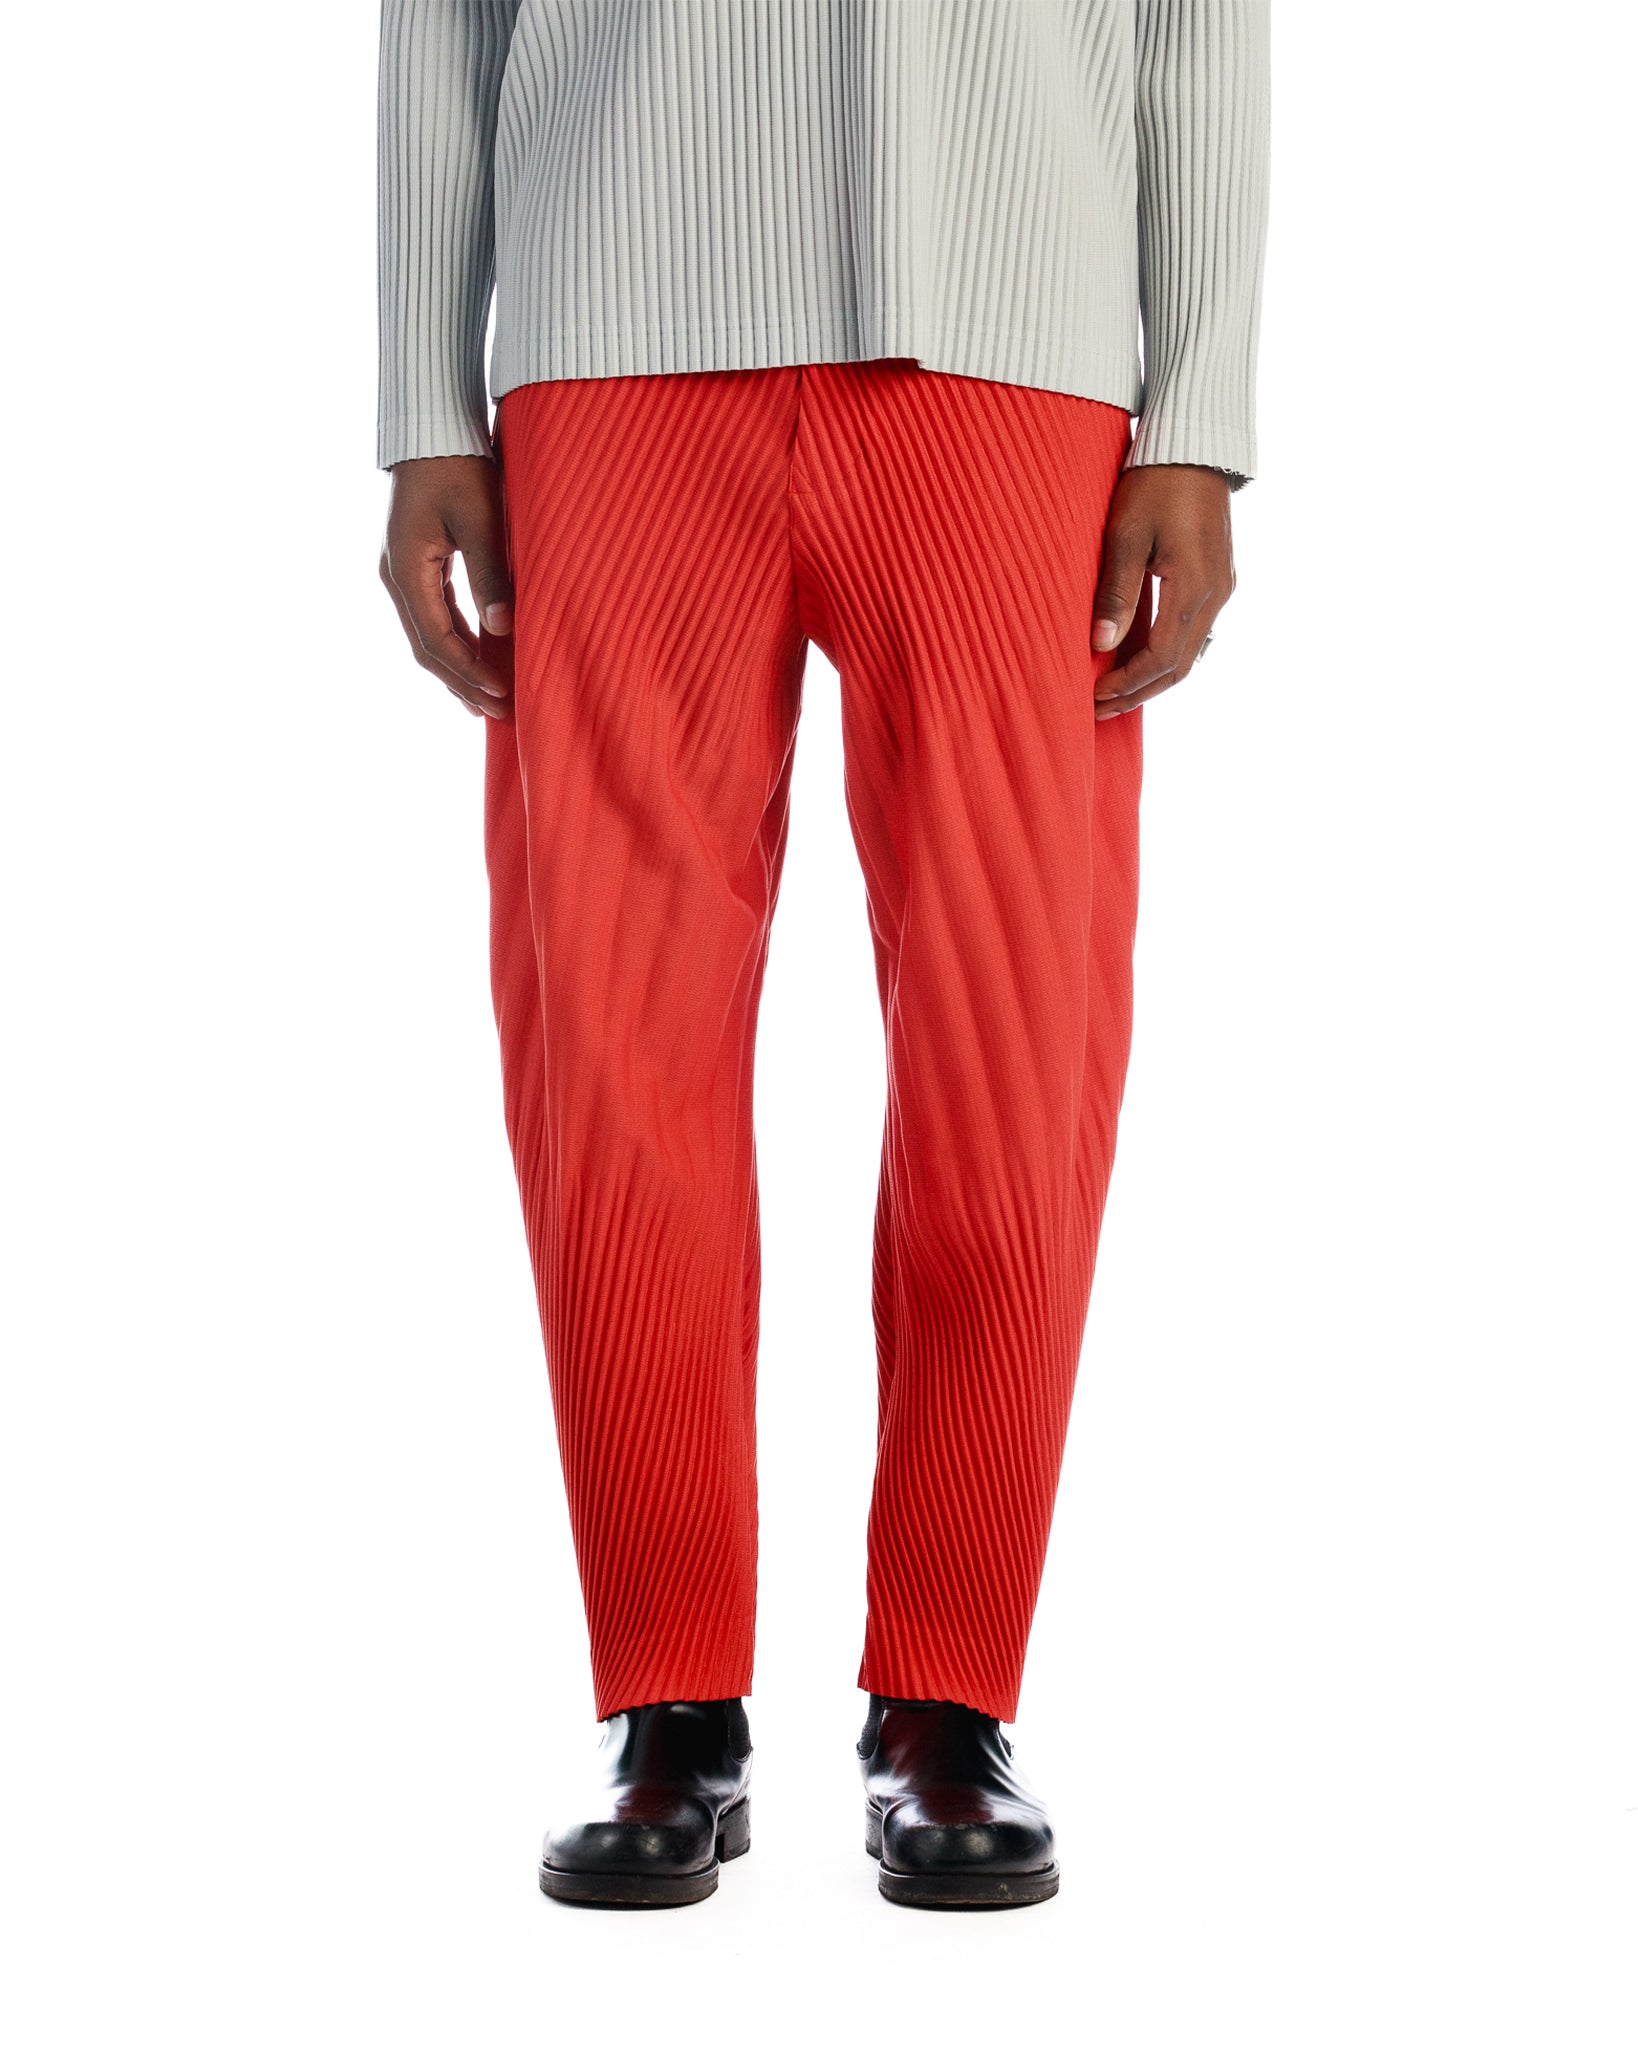 Stylish Homme Plisse Issey Miyake Pleats Bottoms in Dry Red 